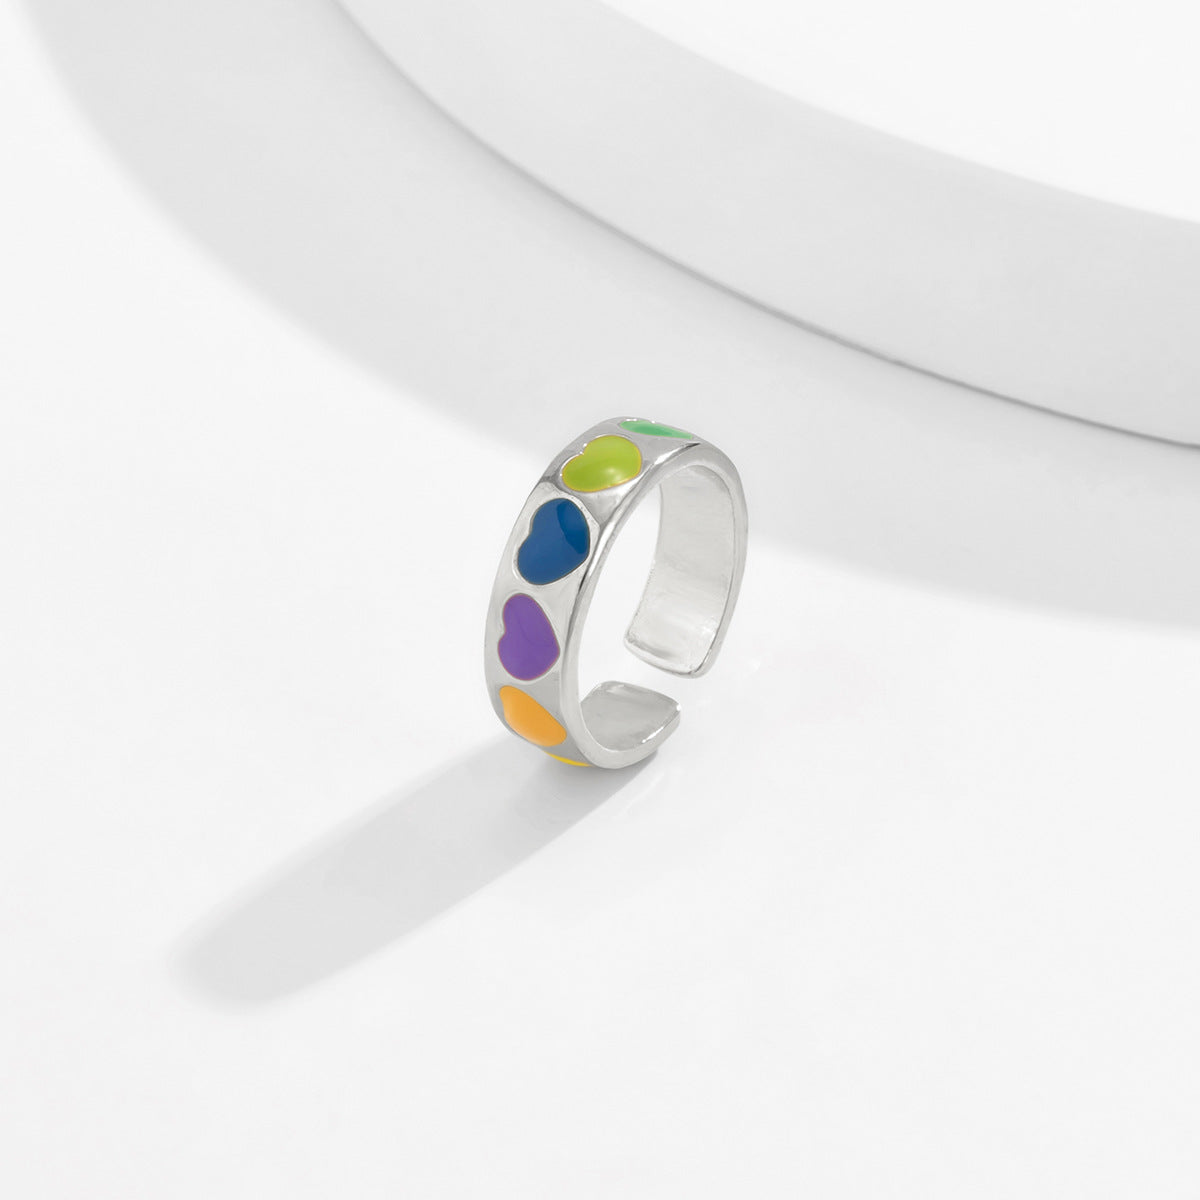 Vienna Verve Heart-shaped Opening Ring with Mixed Color Geometric Punk Design